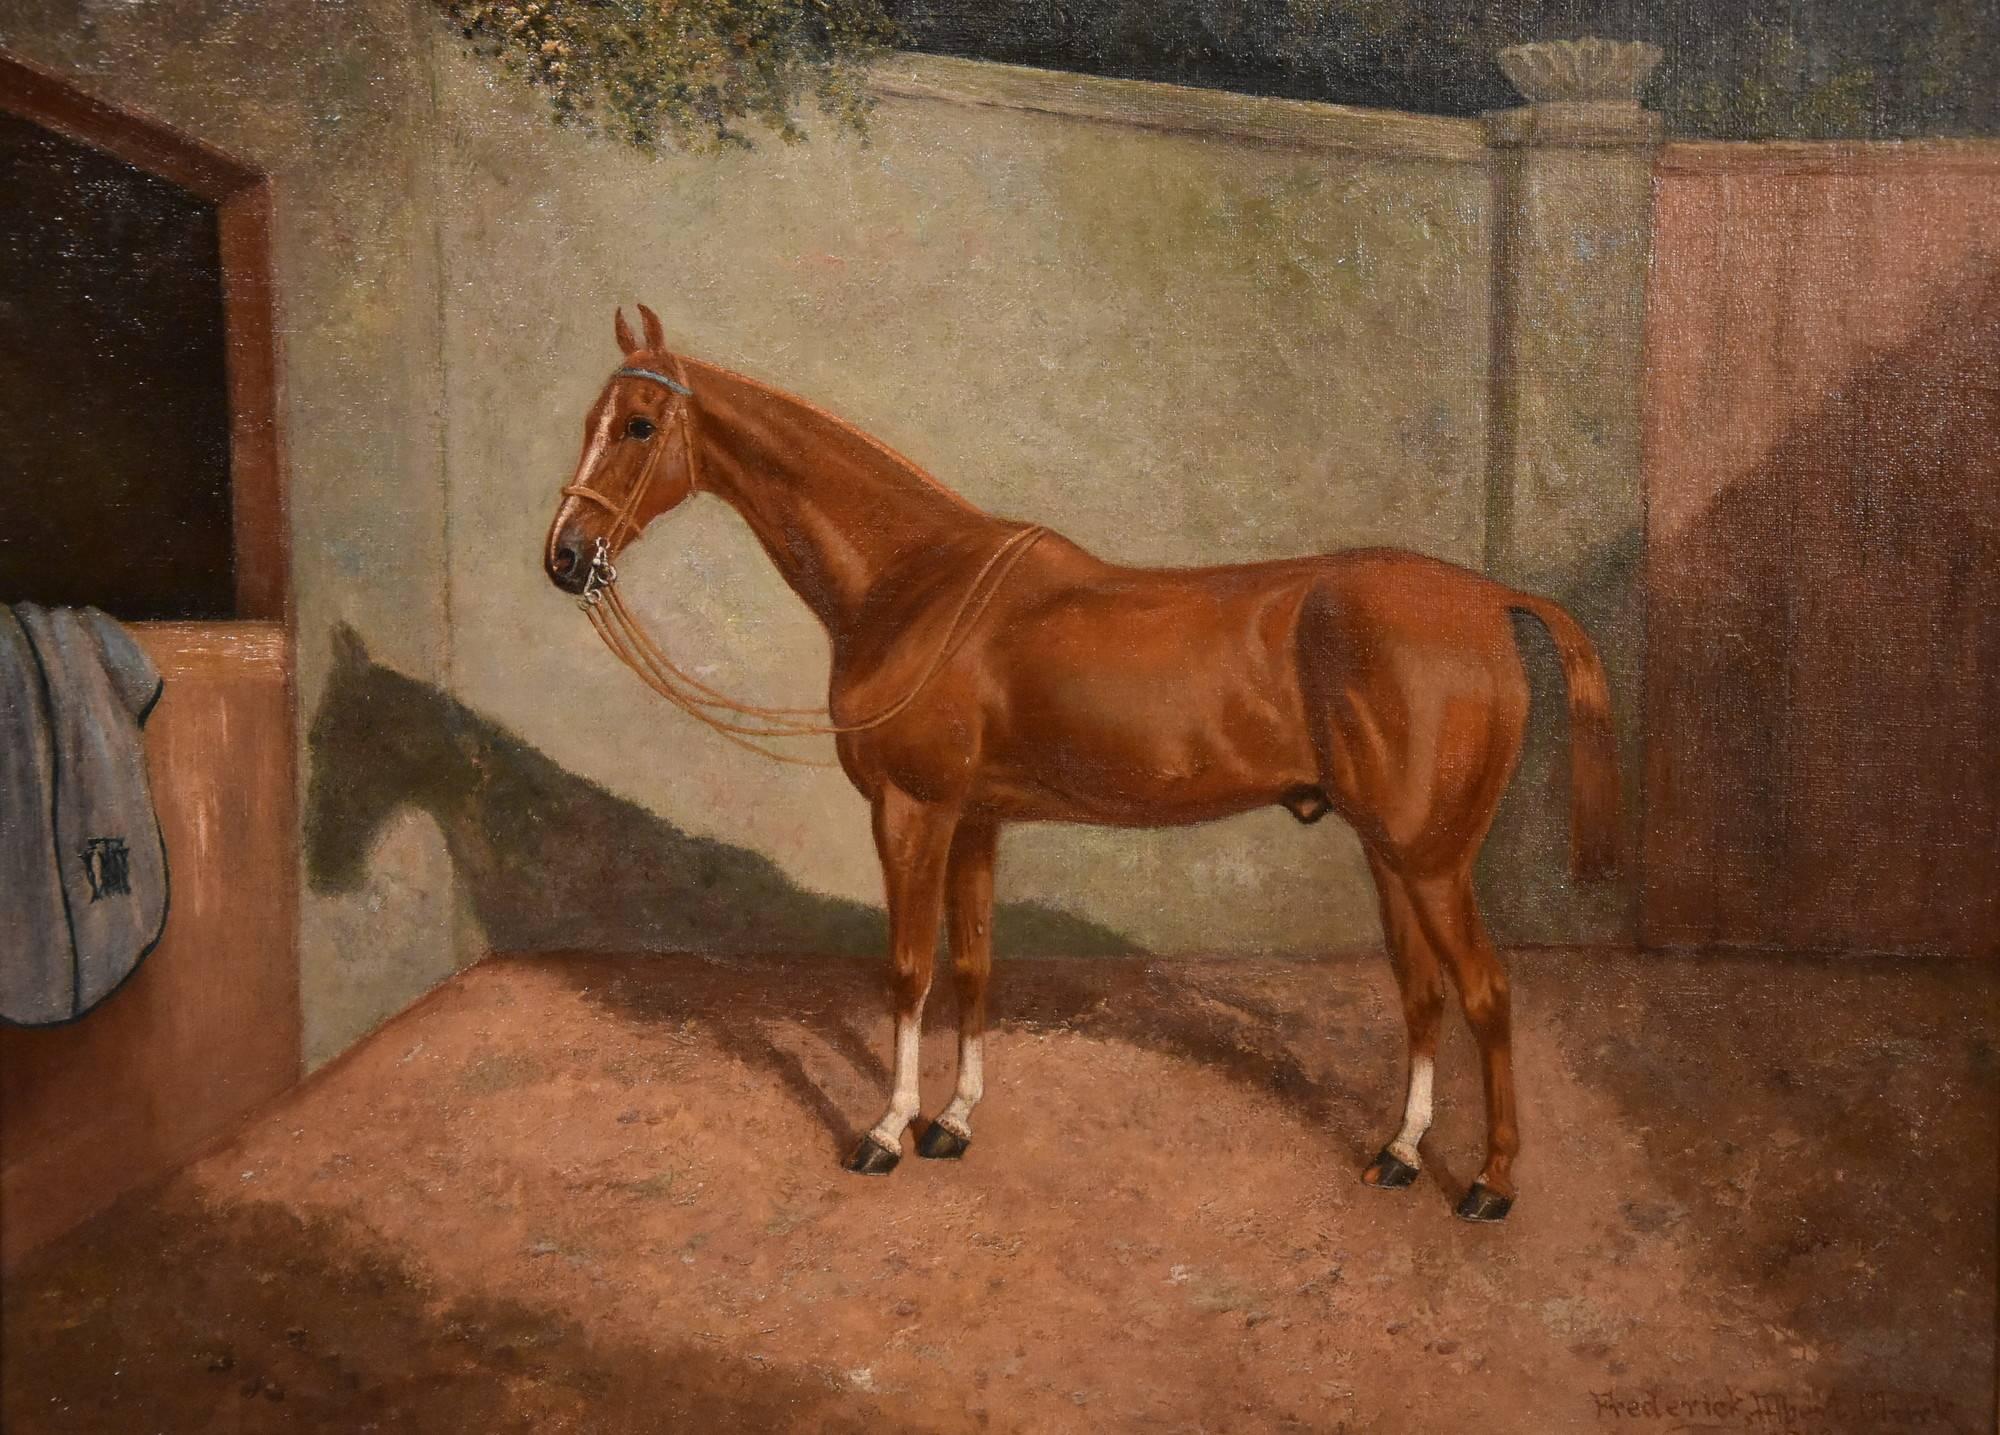 "A Hunter" by Frederick A Clark. Who flourished 1900-1920 was a member of the Clark family who were influenced by JF Herring. Oil on canvas. Signed and dated 1908.

Dimensions unframed:
height 20" x width 24"

Dimensions